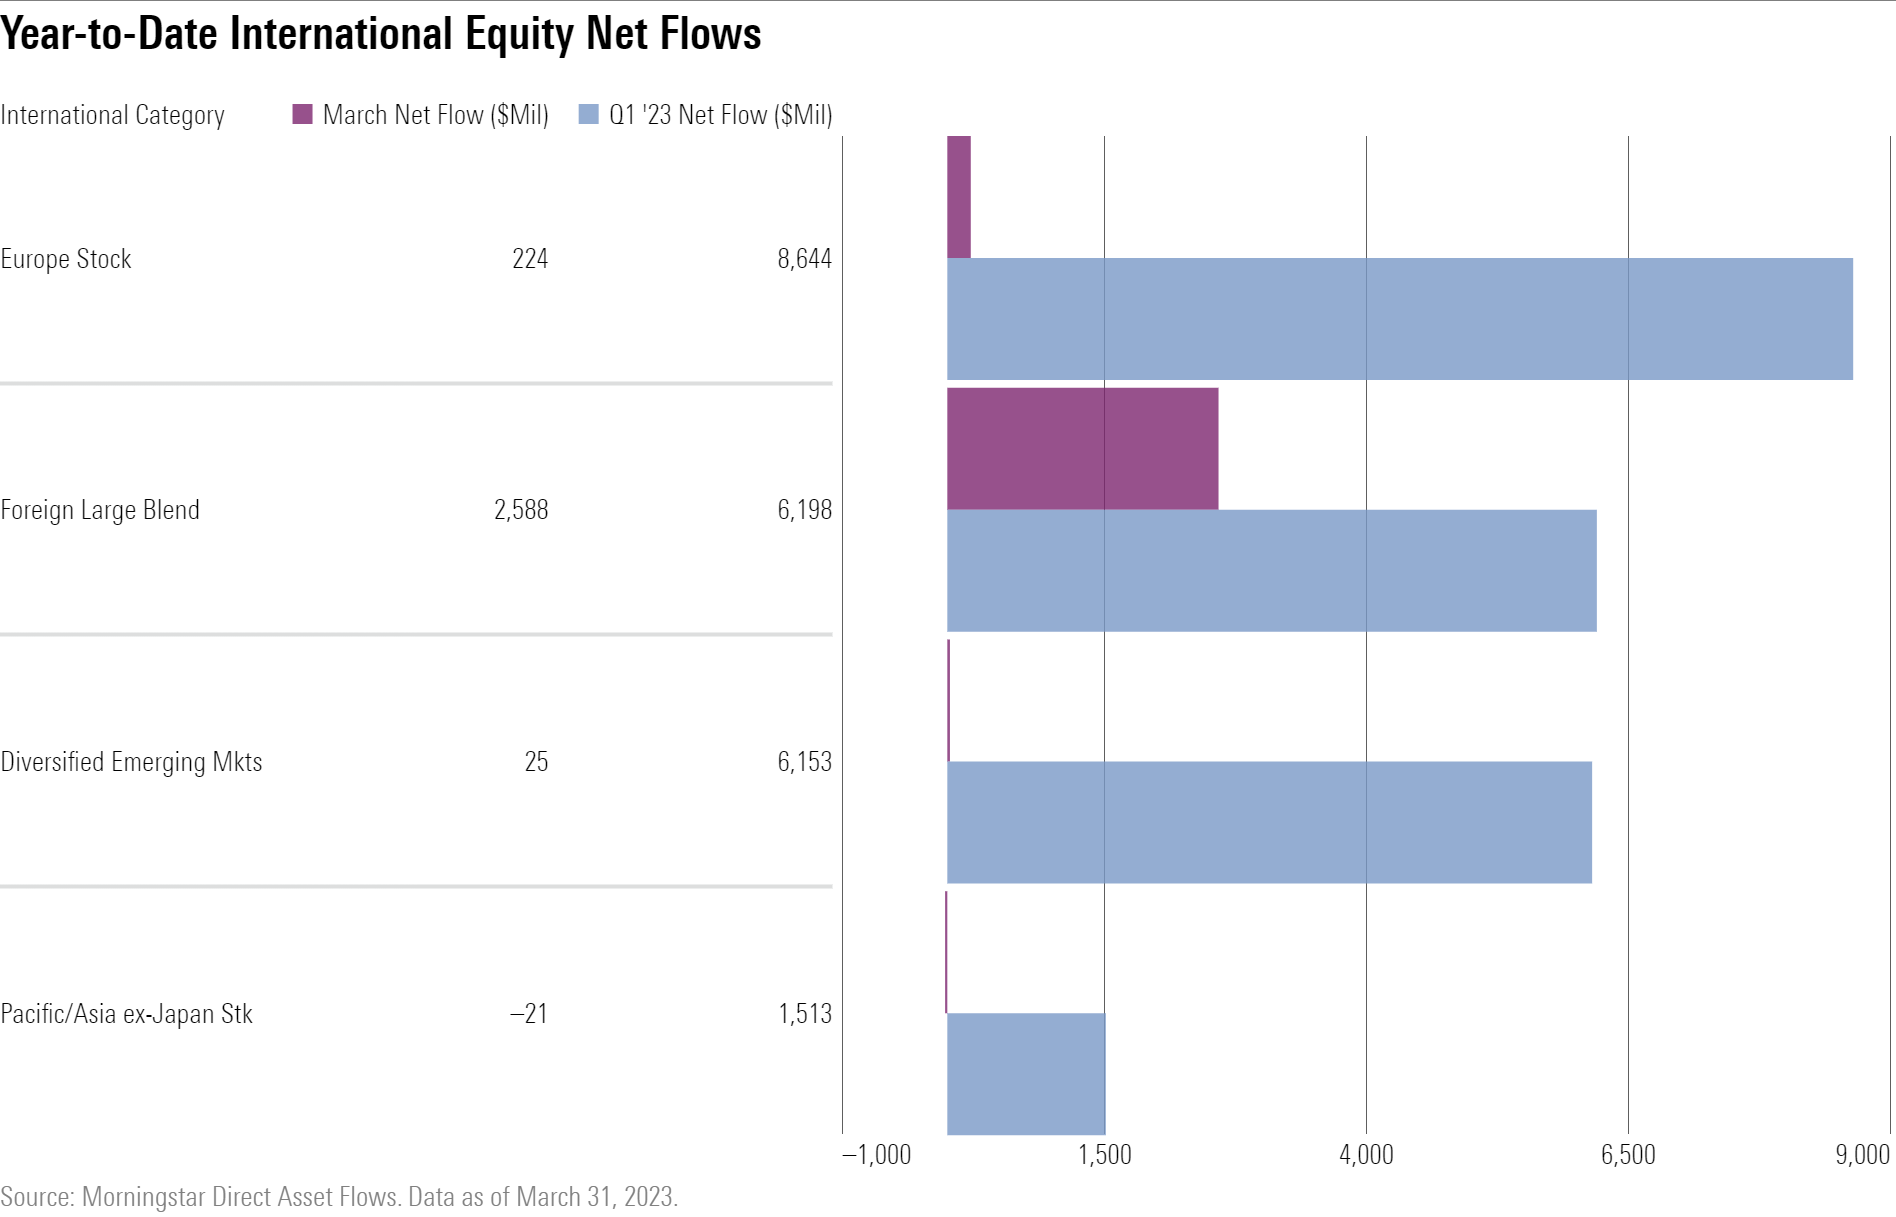 Bar graph comparing first quarter 2023 flows with March 2023 flows for international categories.